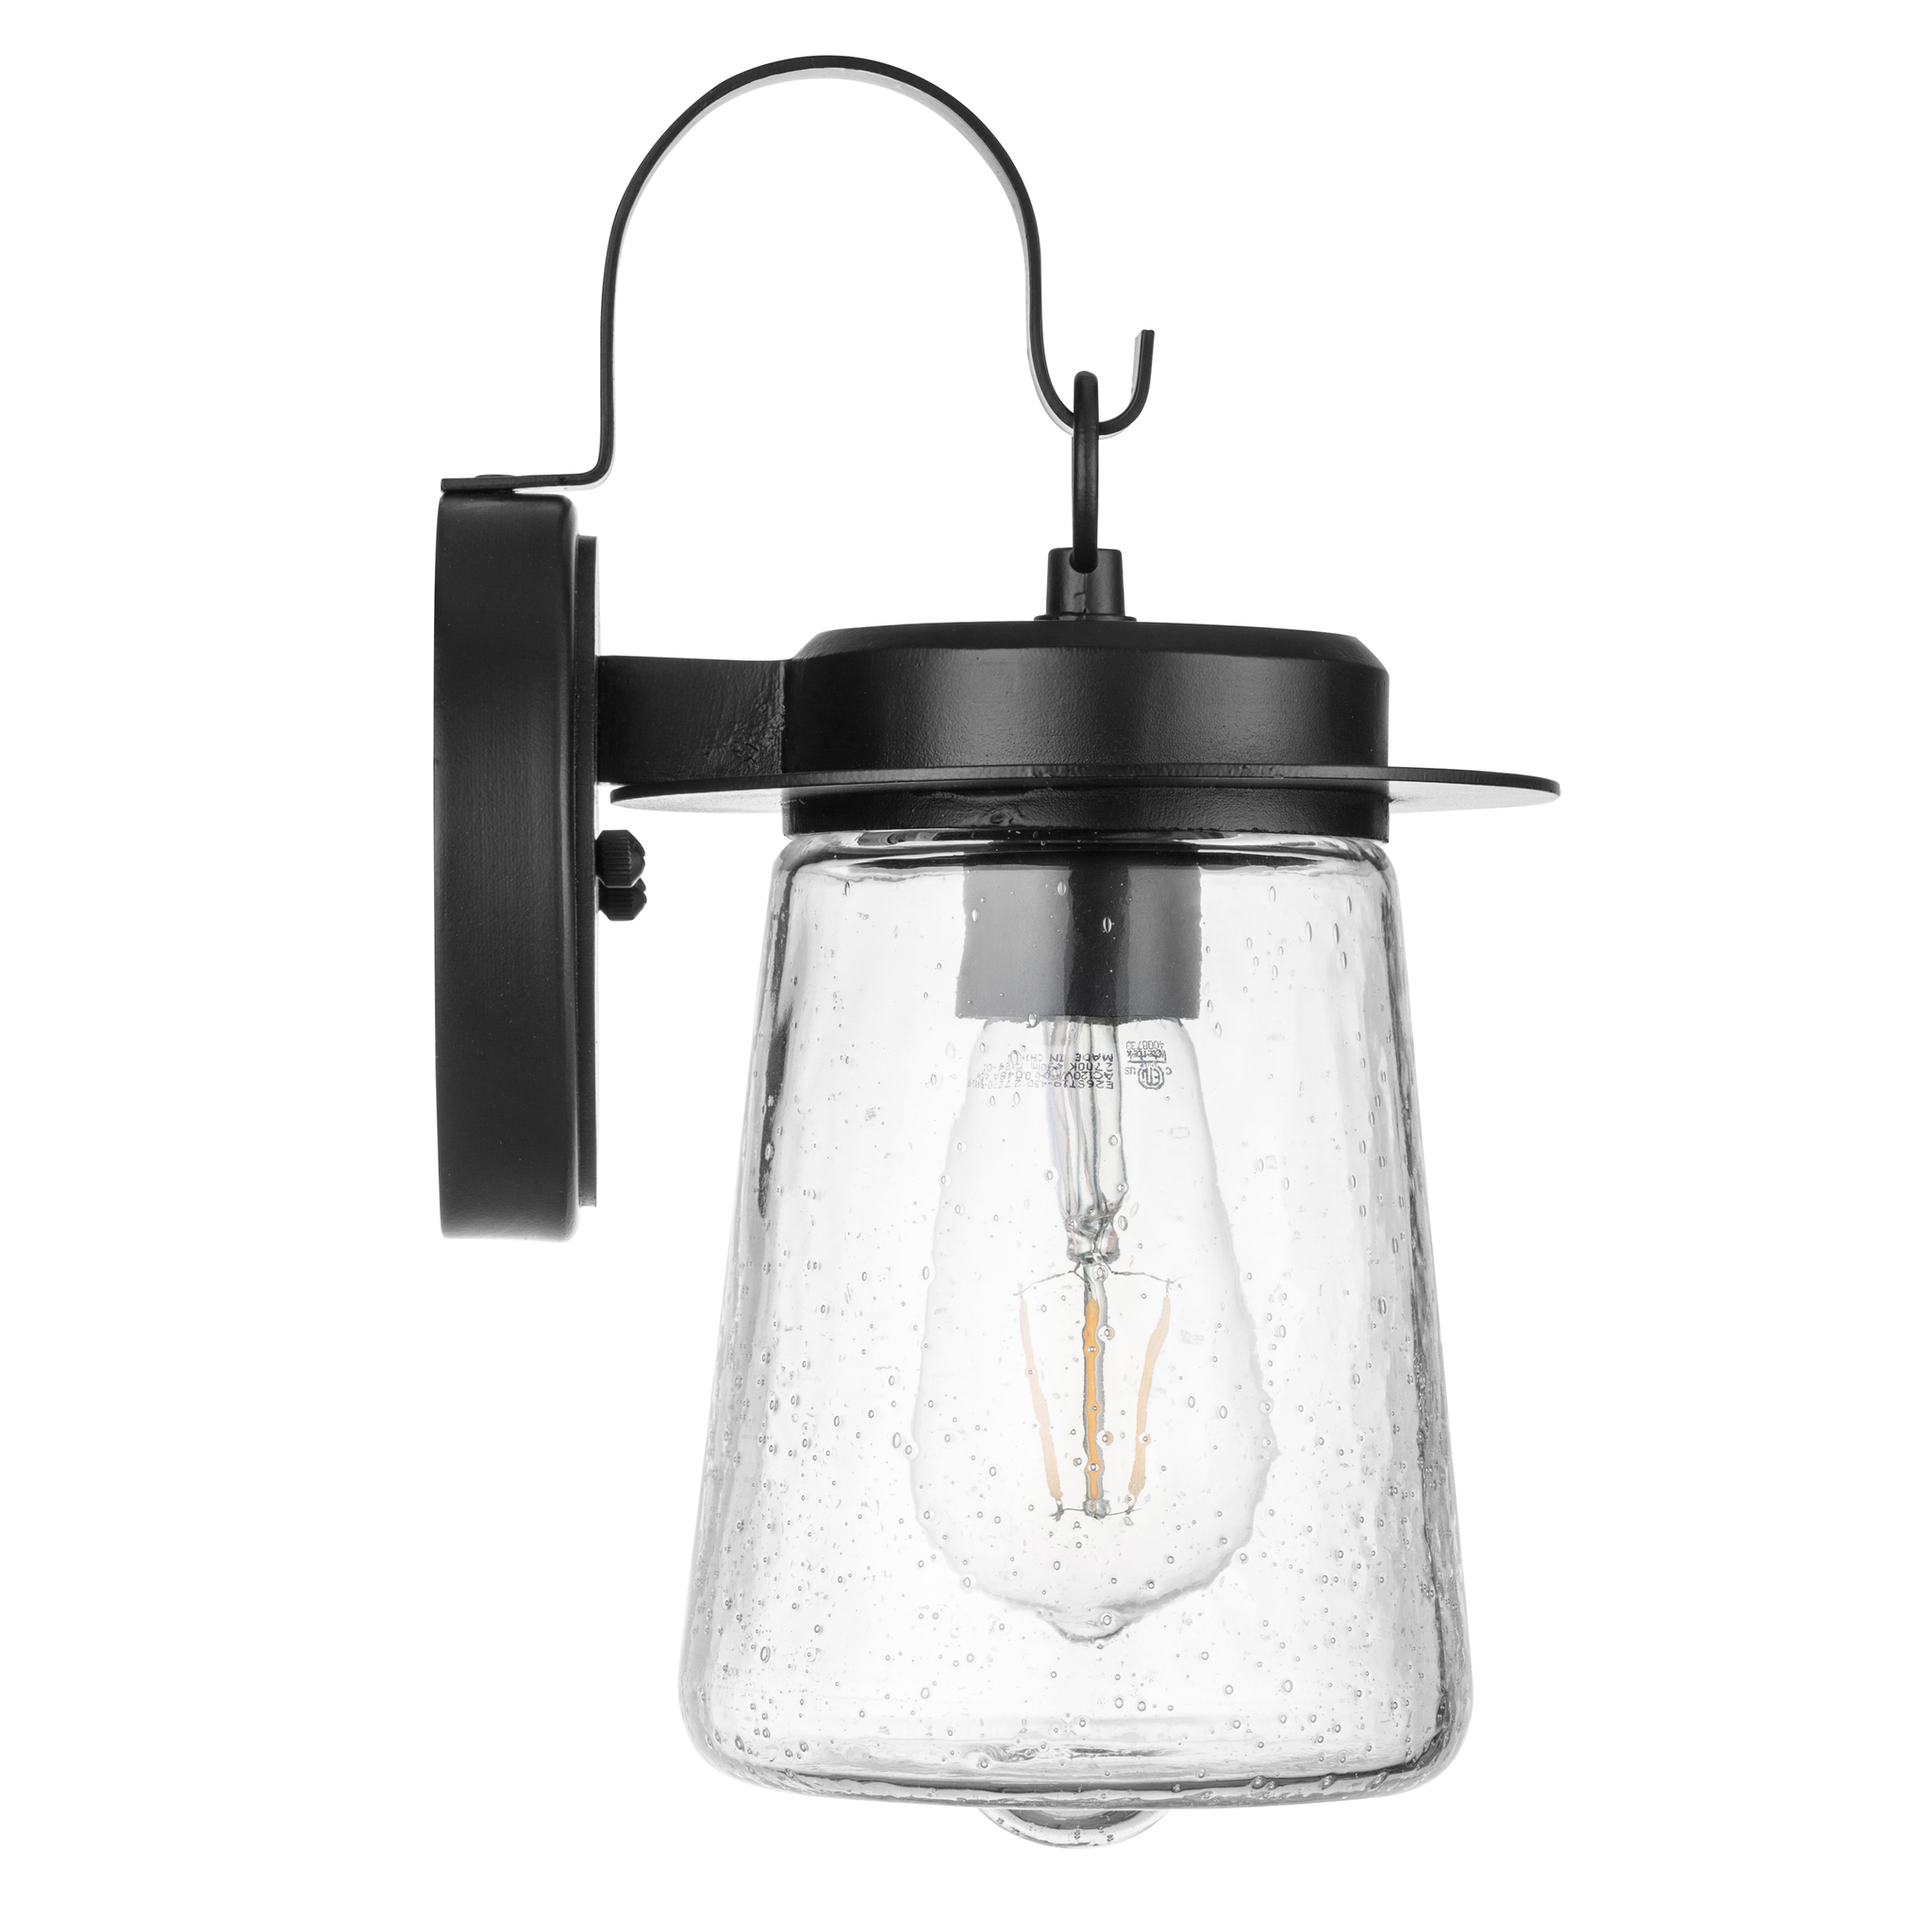 Ruttland, Wet-Rated Coach Light, Matte Black by Prominence Home